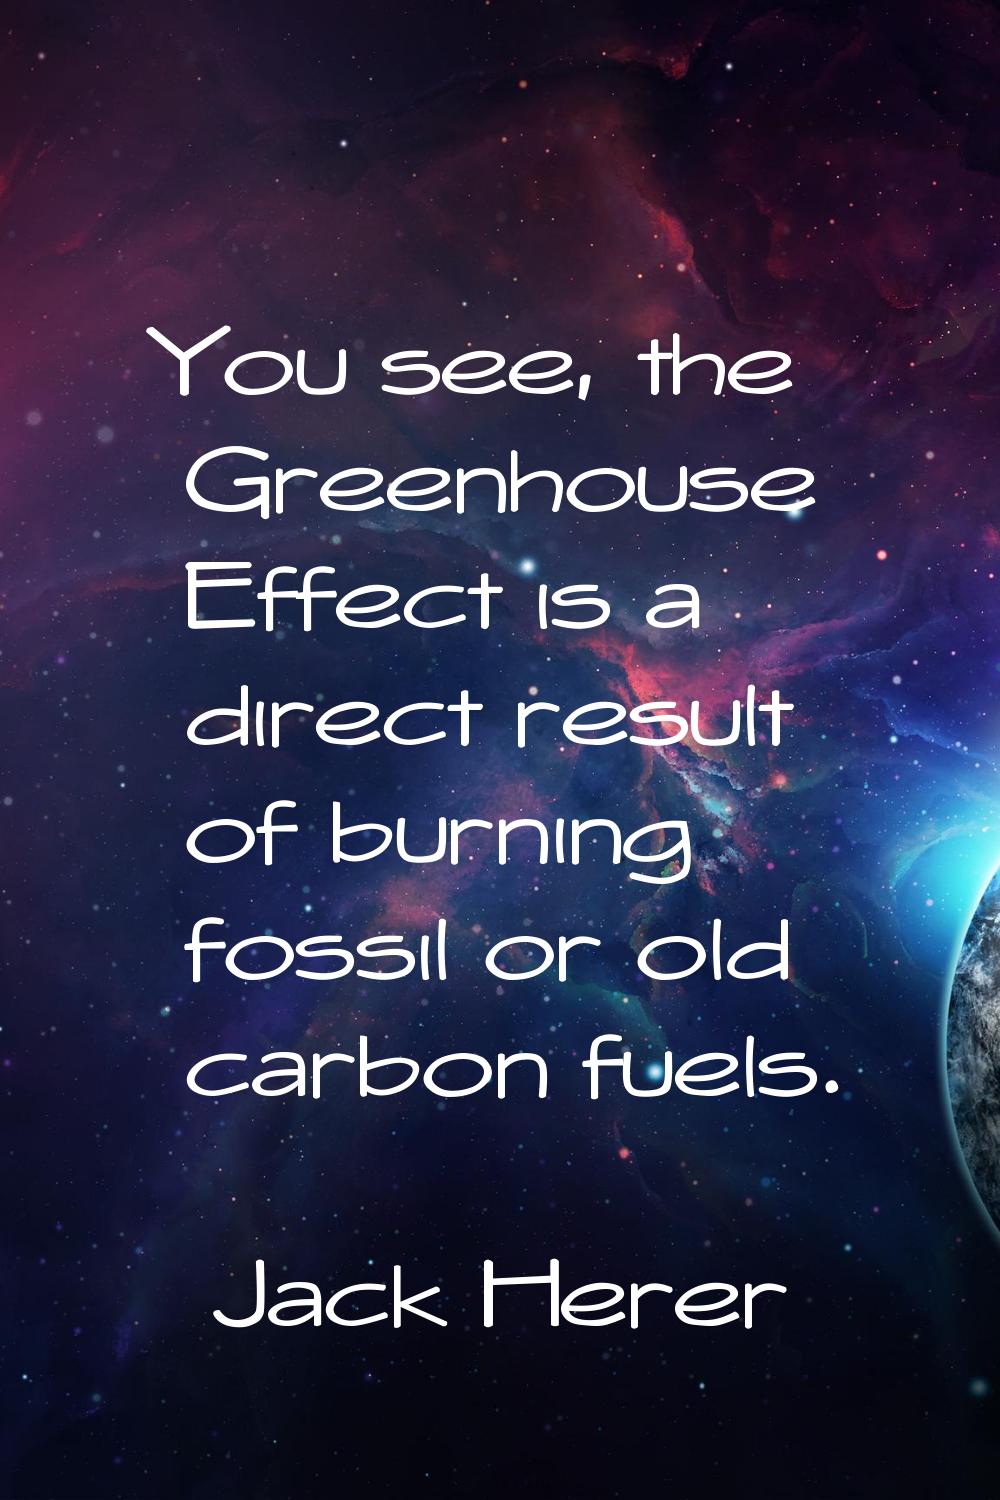 You see, the Greenhouse Effect is a direct result of burning fossil or old carbon fuels.